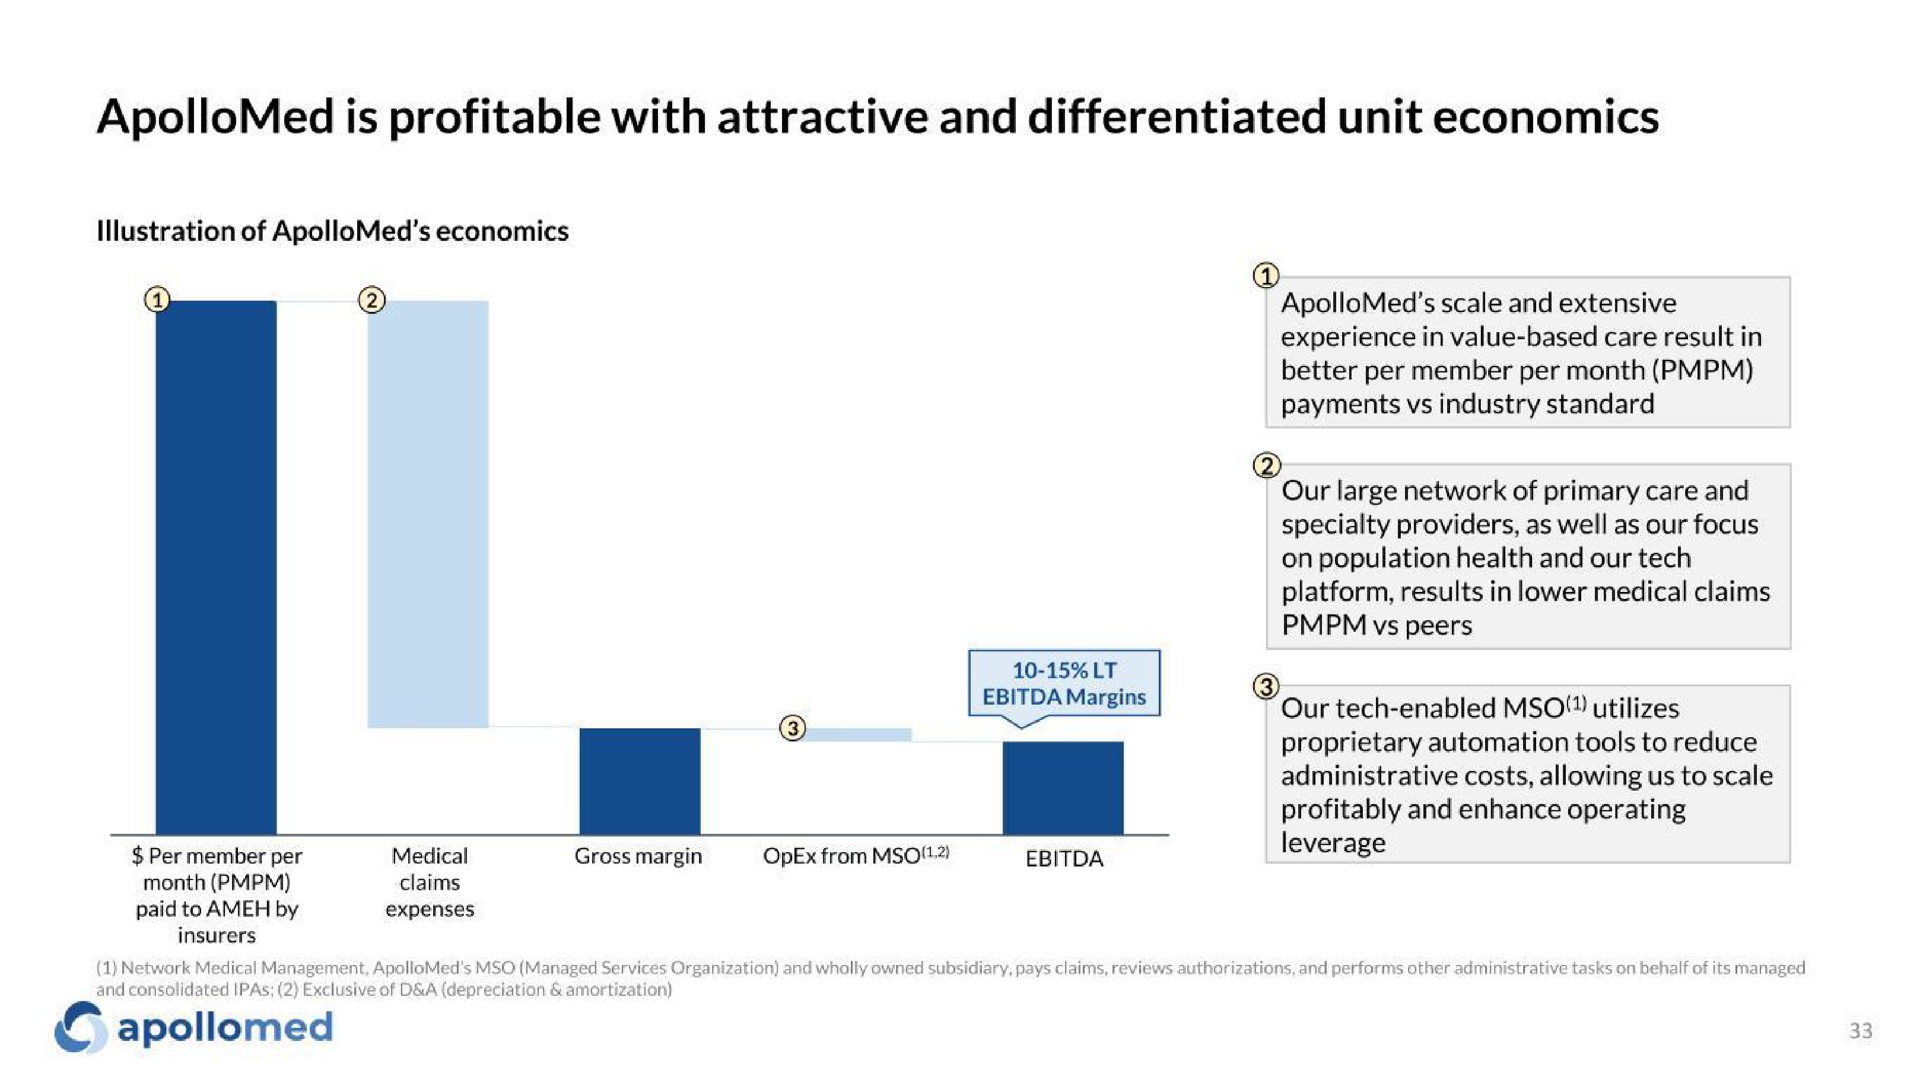 is profitable with attractive and differentiated unit economics | Apollo Medical Holdings